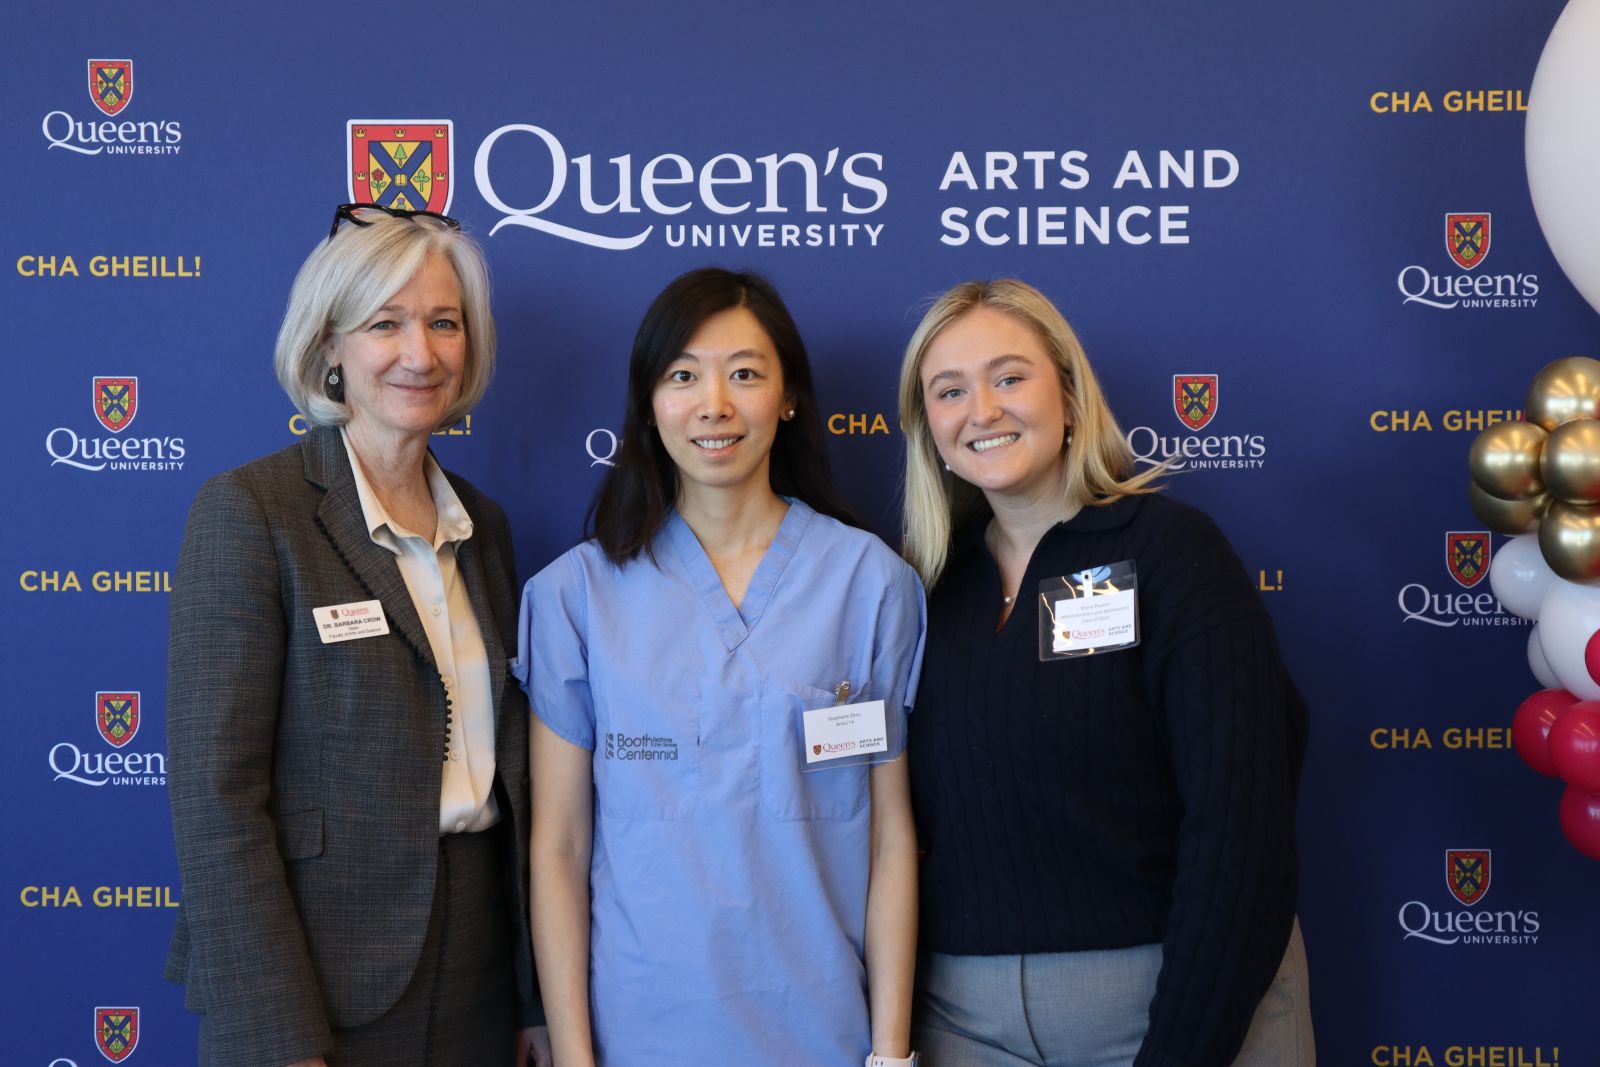 Barbara Crow, Stephanie Zhou, and Brynn Paxton posing in front of Arts and Science blue backdrop at ElevateHer